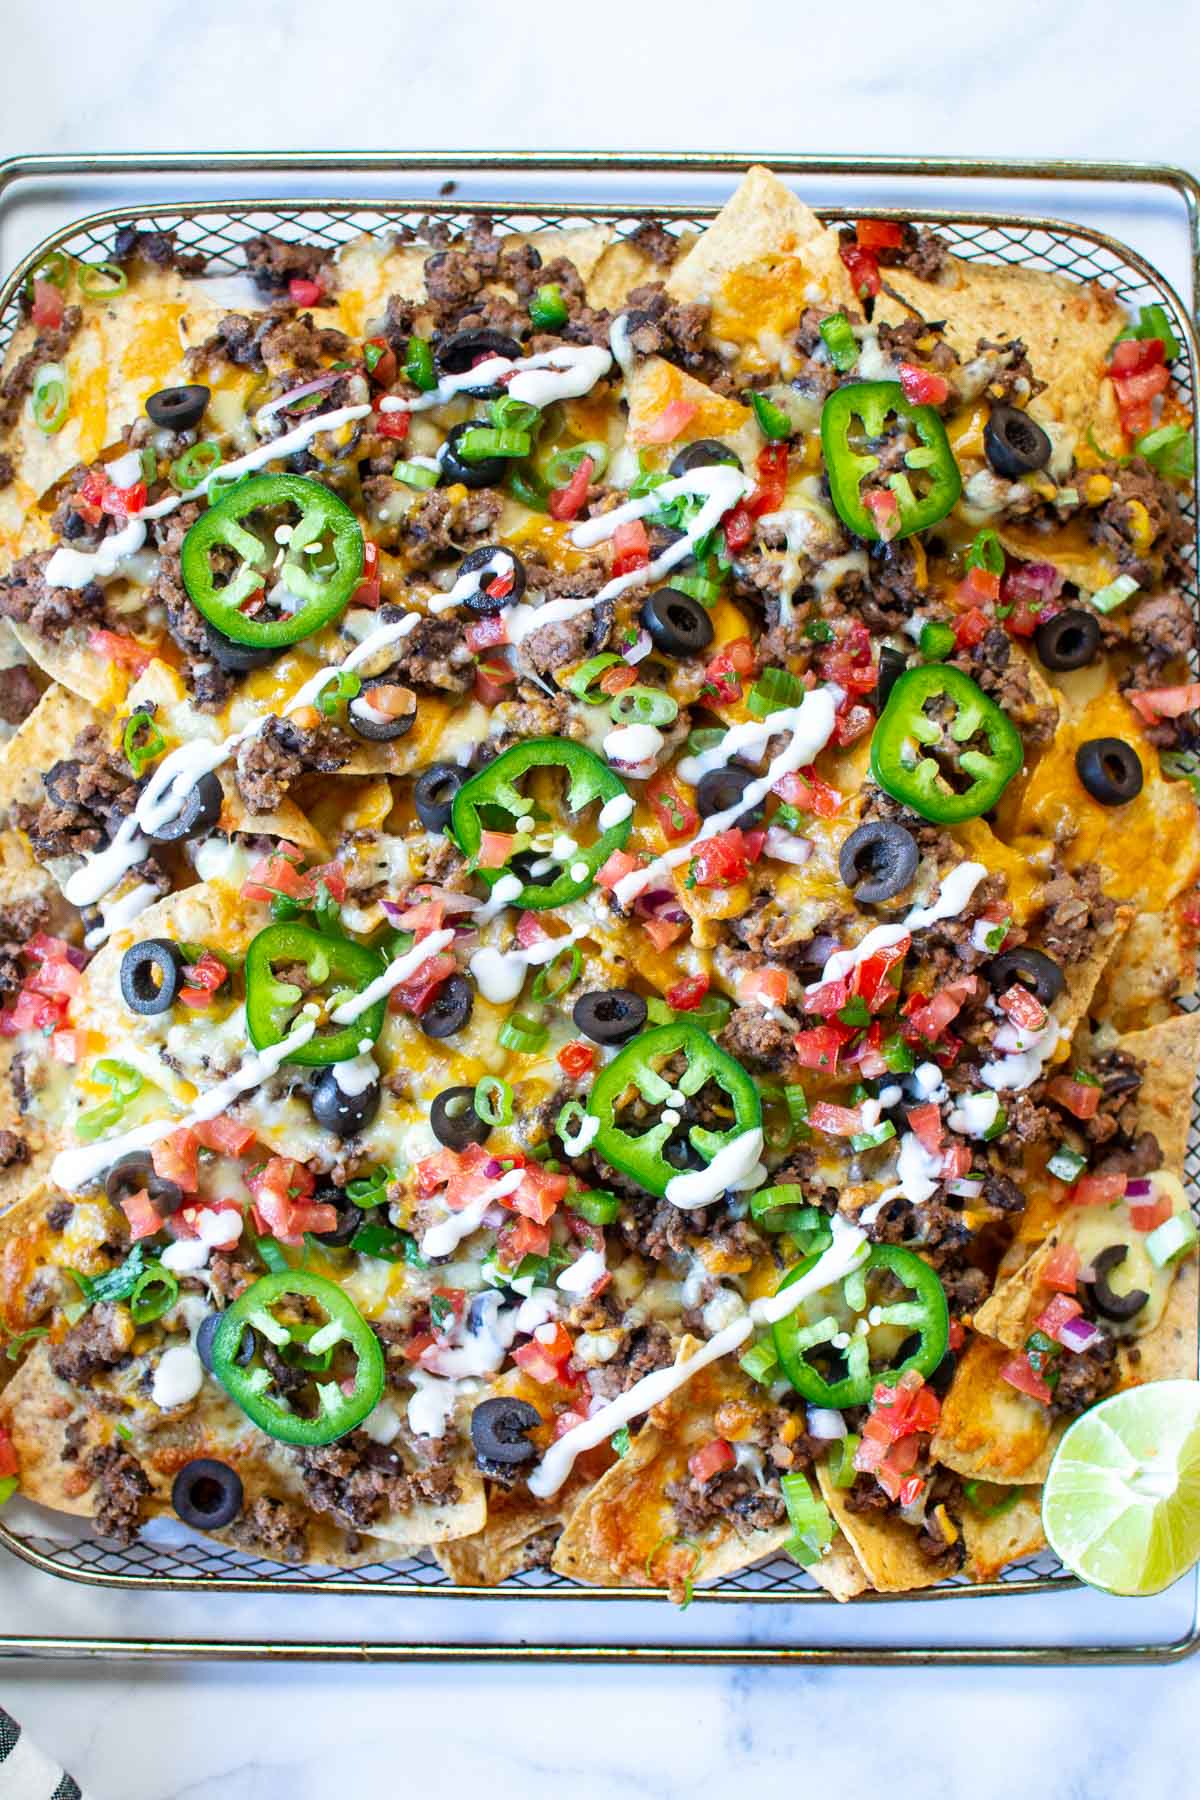 Nachos on an air fryer tray topped with meat, beans, veggies and sour cream.